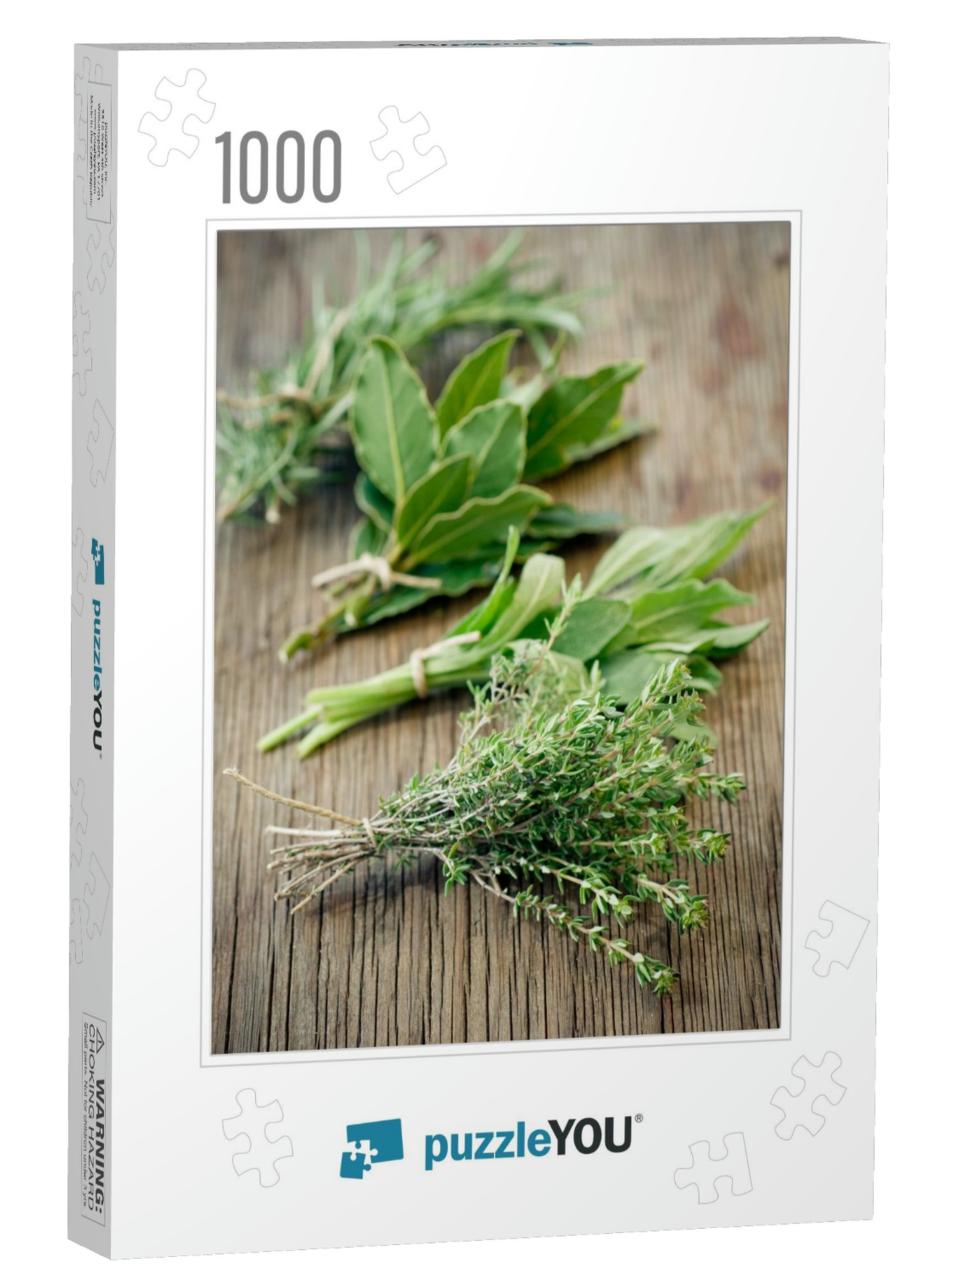 Fresh Herbs on Wooden Surface... Jigsaw Puzzle with 1000 pieces